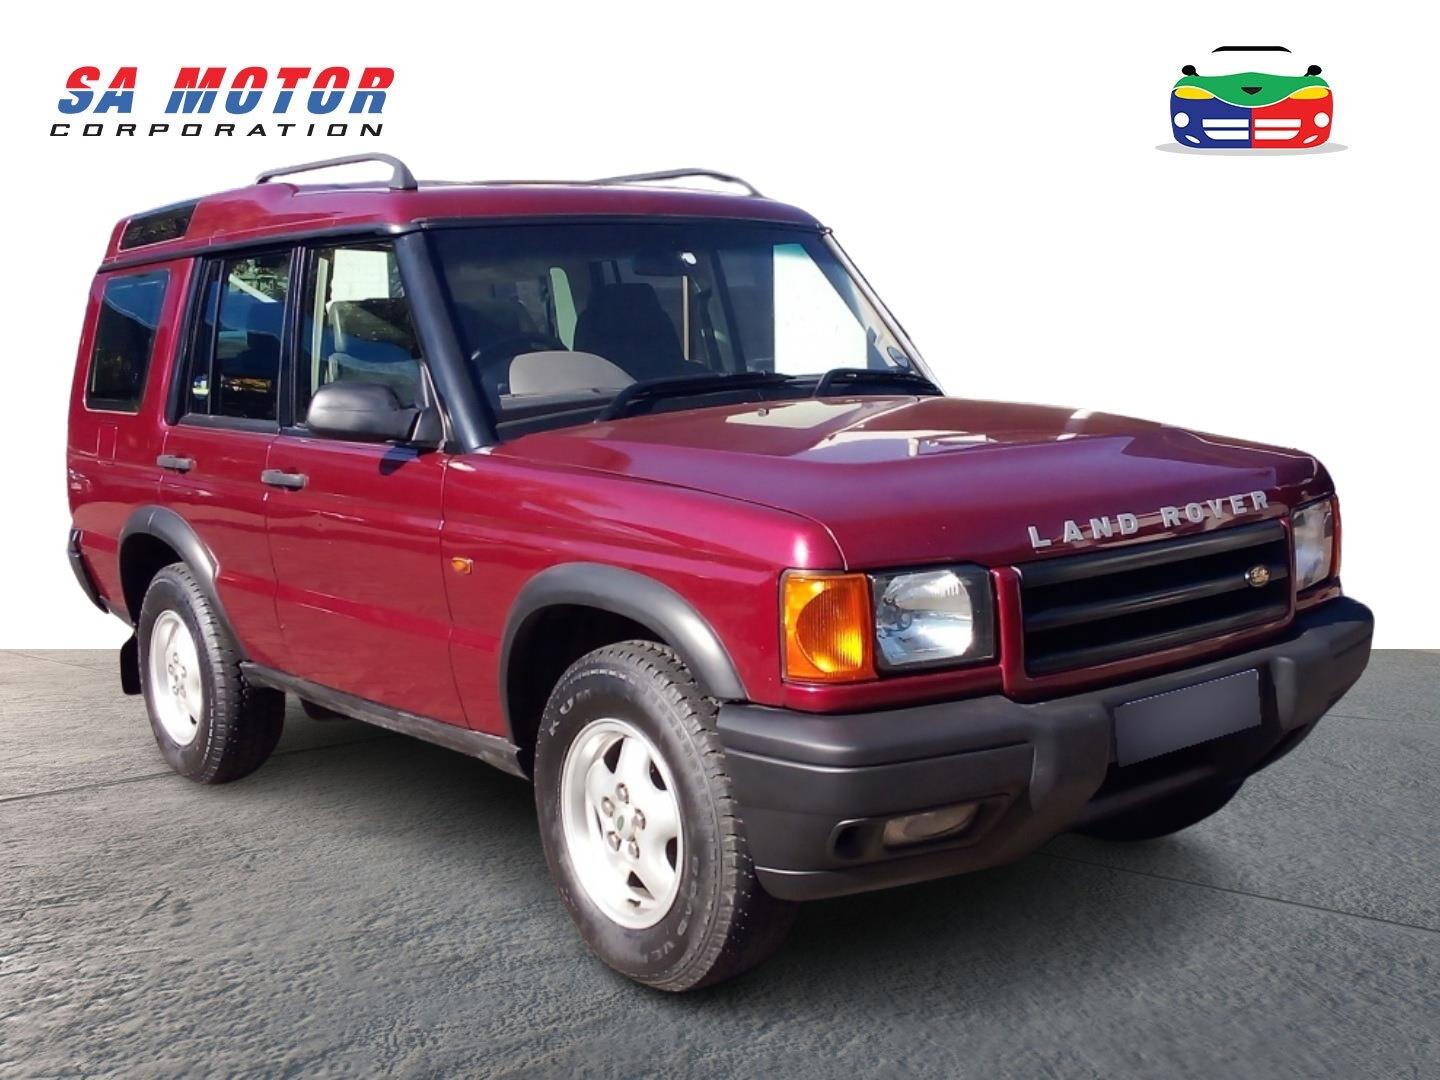 1999 Land Rover Discovery 2 4.0 V8 Gs for sale - 329830